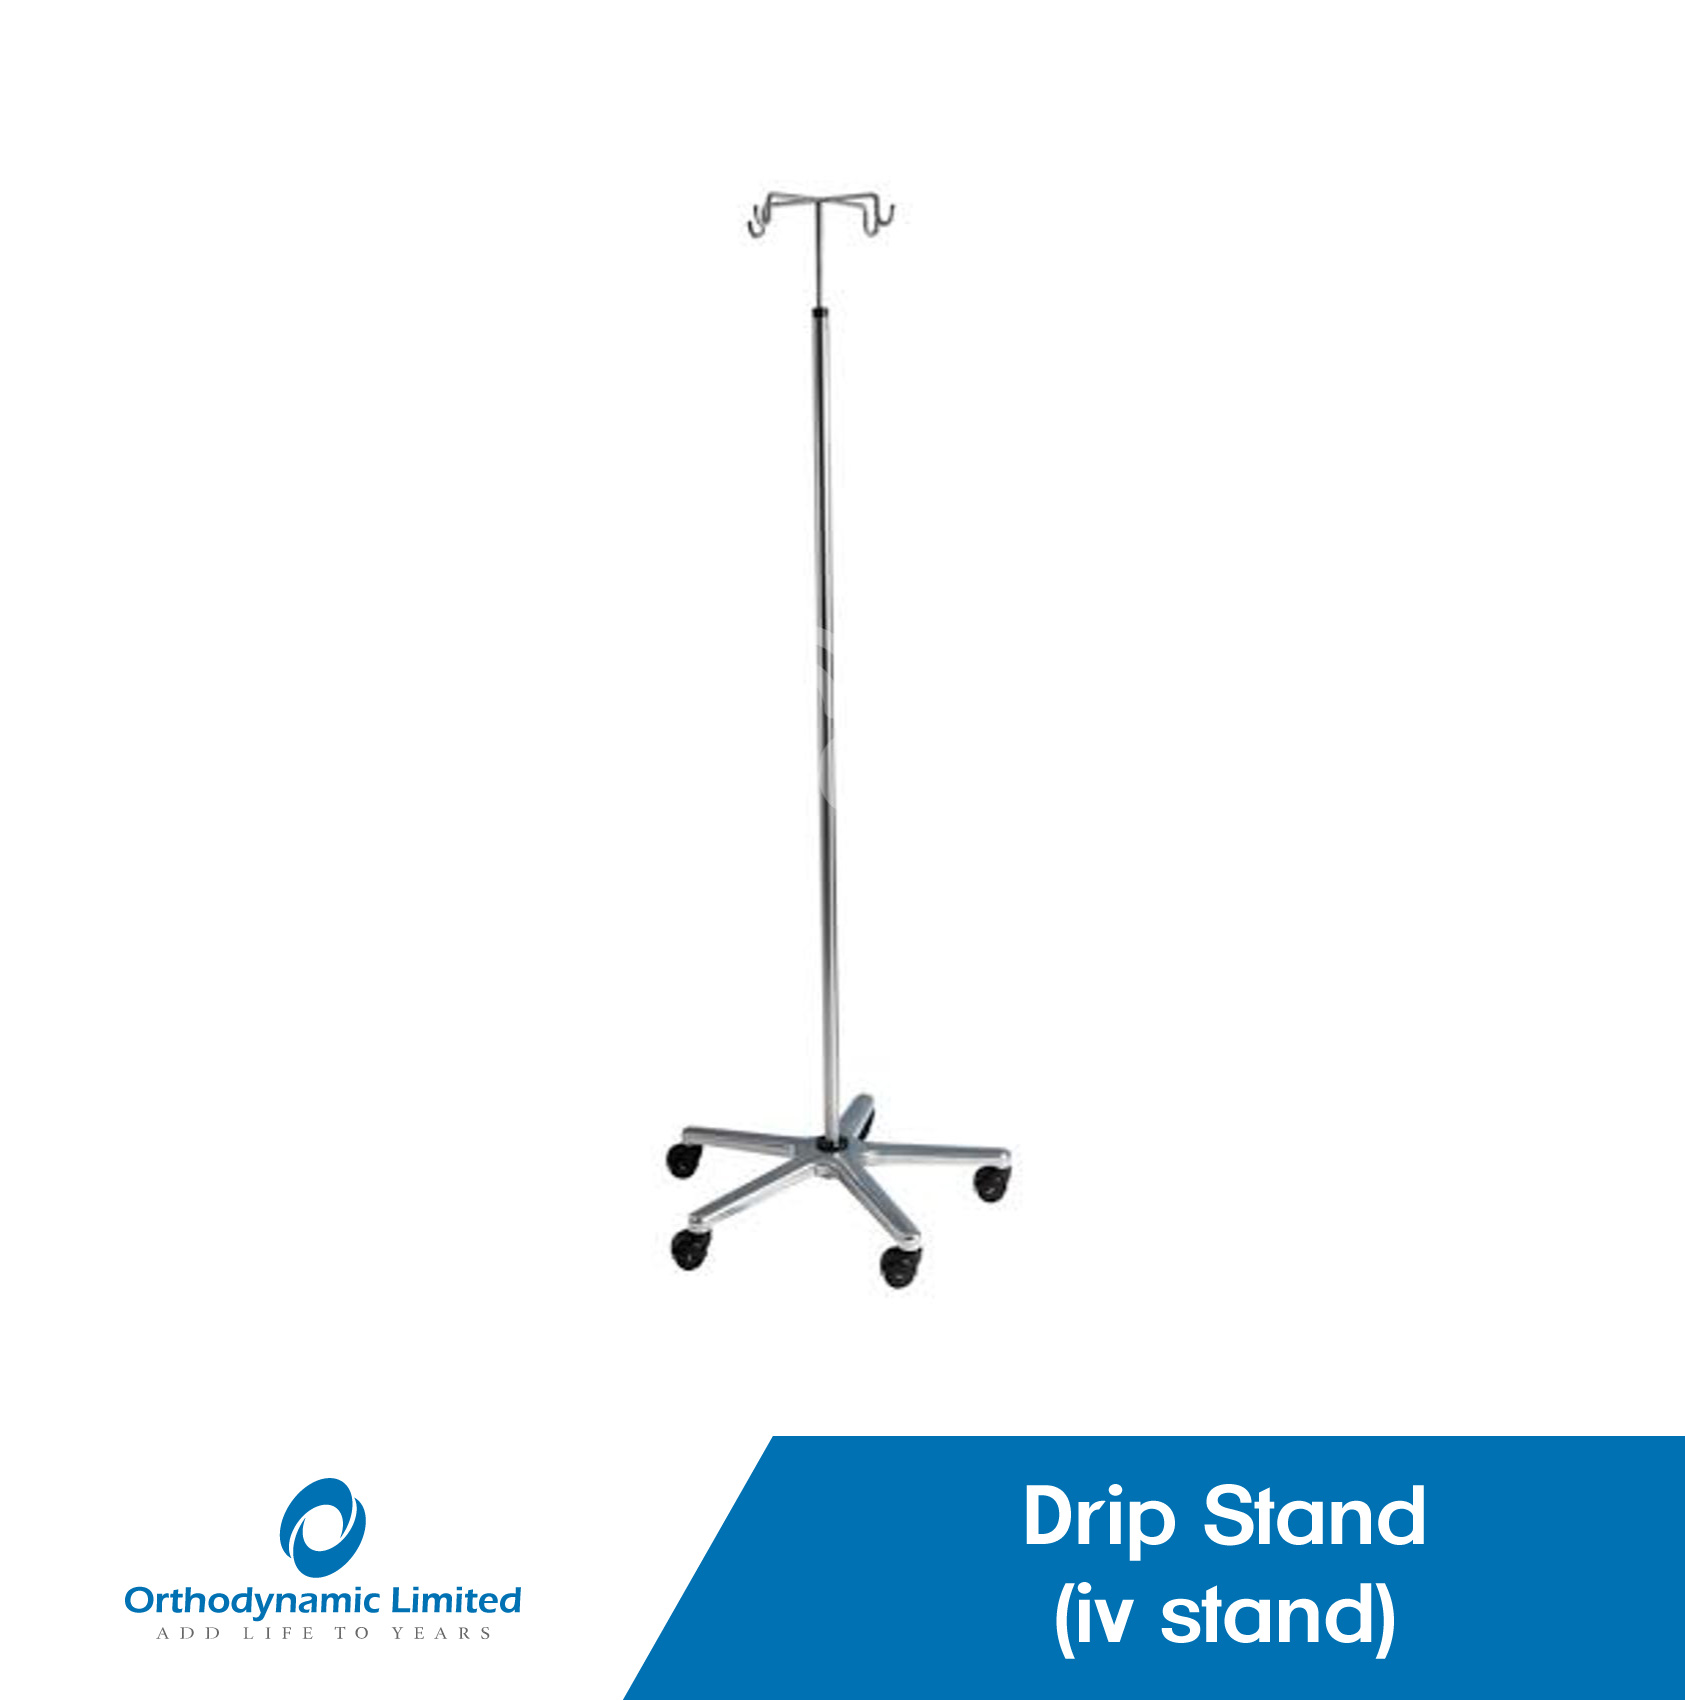 Drip stand (IV stand)